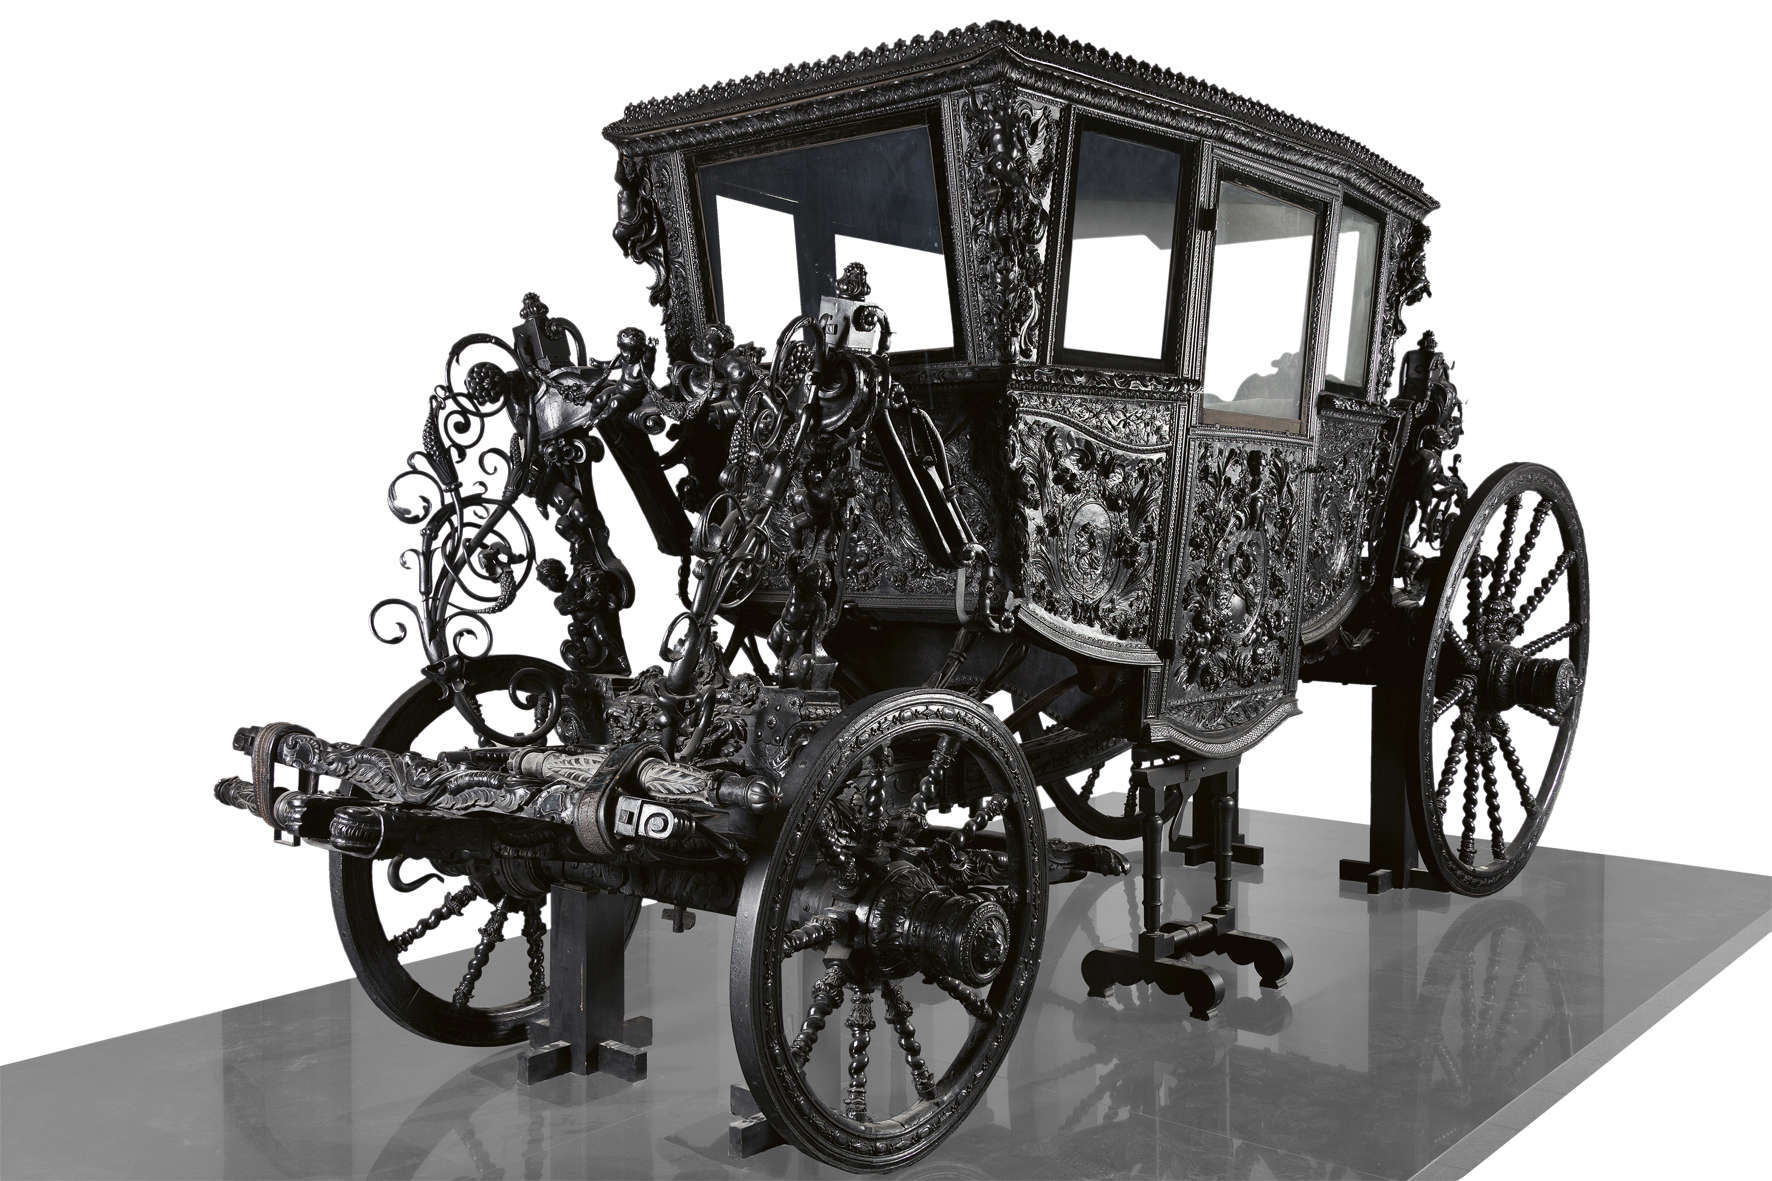 Black chariot (1670-1680; walnut wood, iron, leather, textiles, 265 x 501 x 191 cm; Madrid, Royal Collections Gallery)